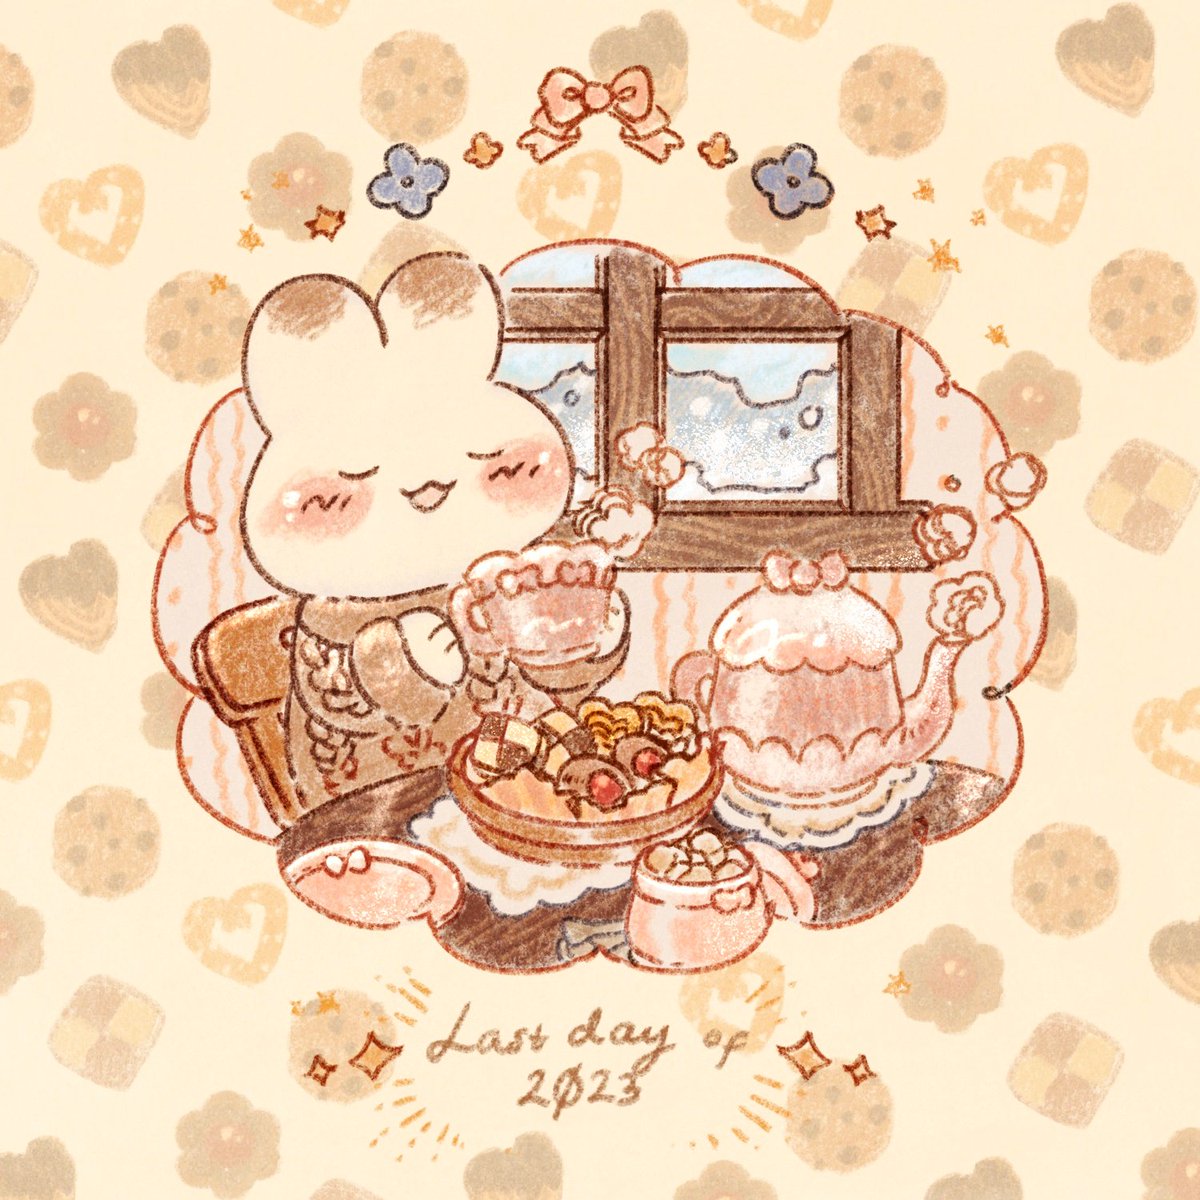 「Enjoy the last day of 2023 with some war」|nao 🍞🍳のイラスト